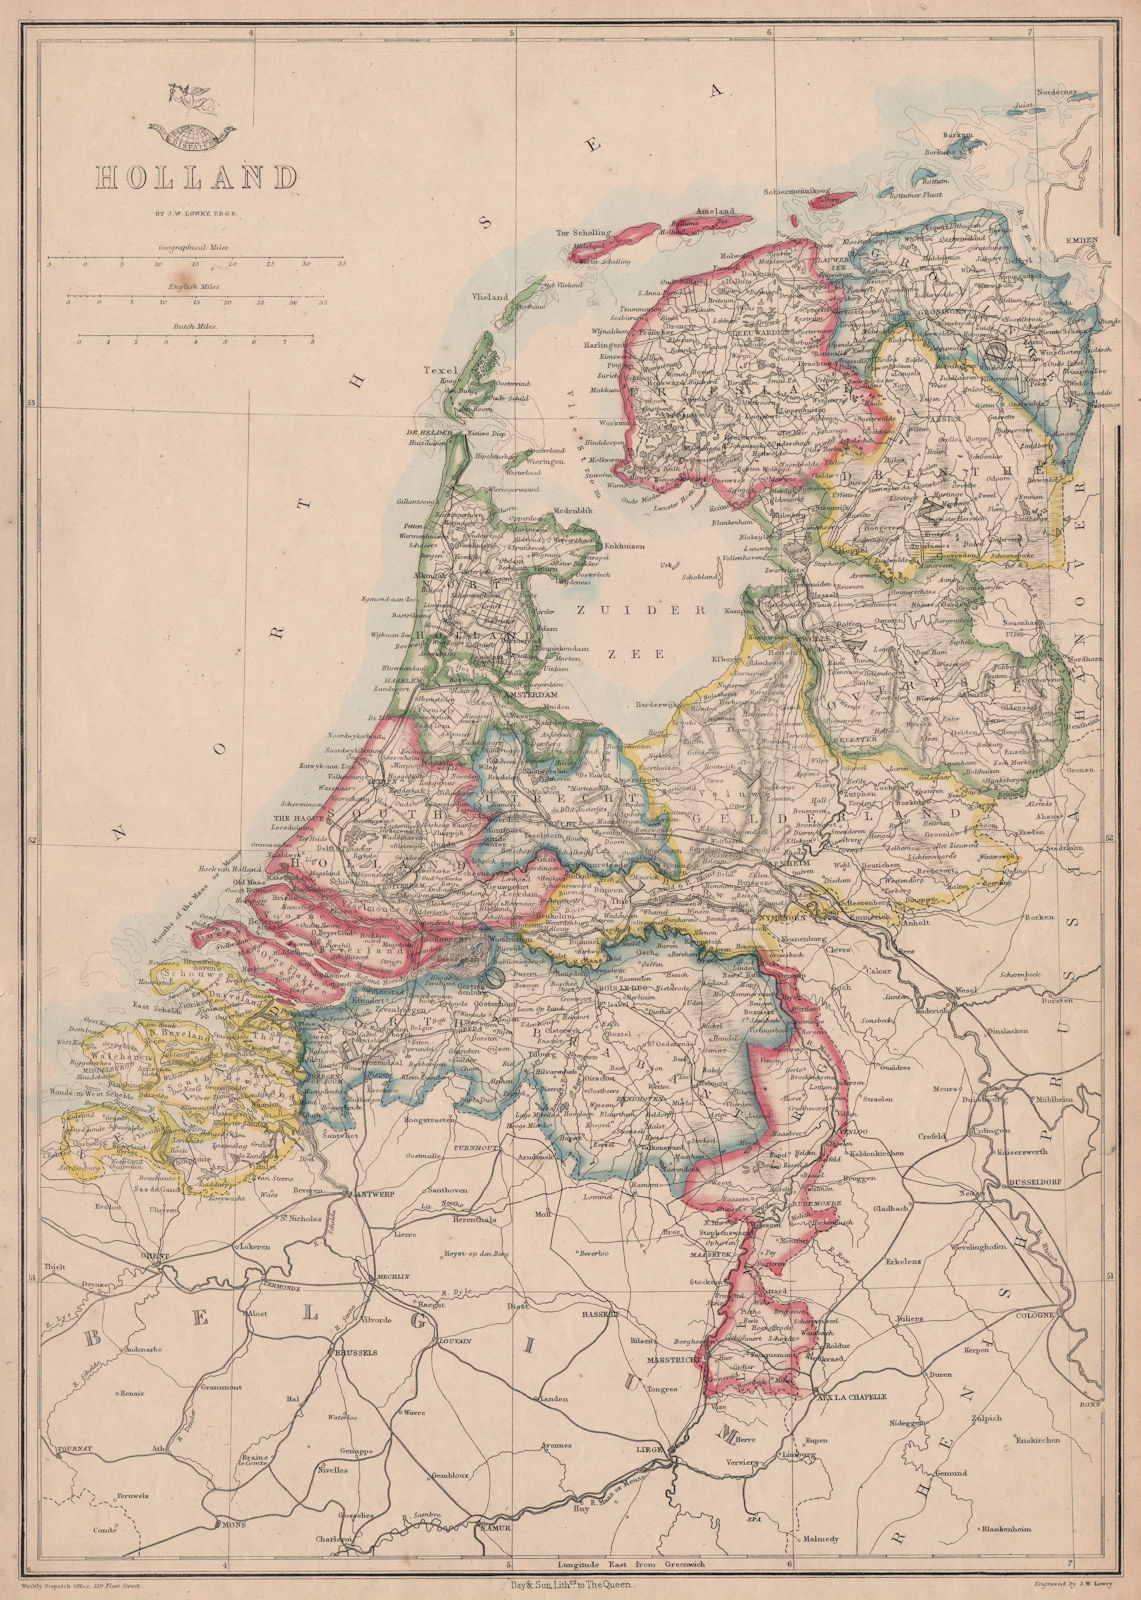 Associate Product 'Holland'. Netherlands in provinces. JW LOWRY for the Dispatch atlas 1863 map